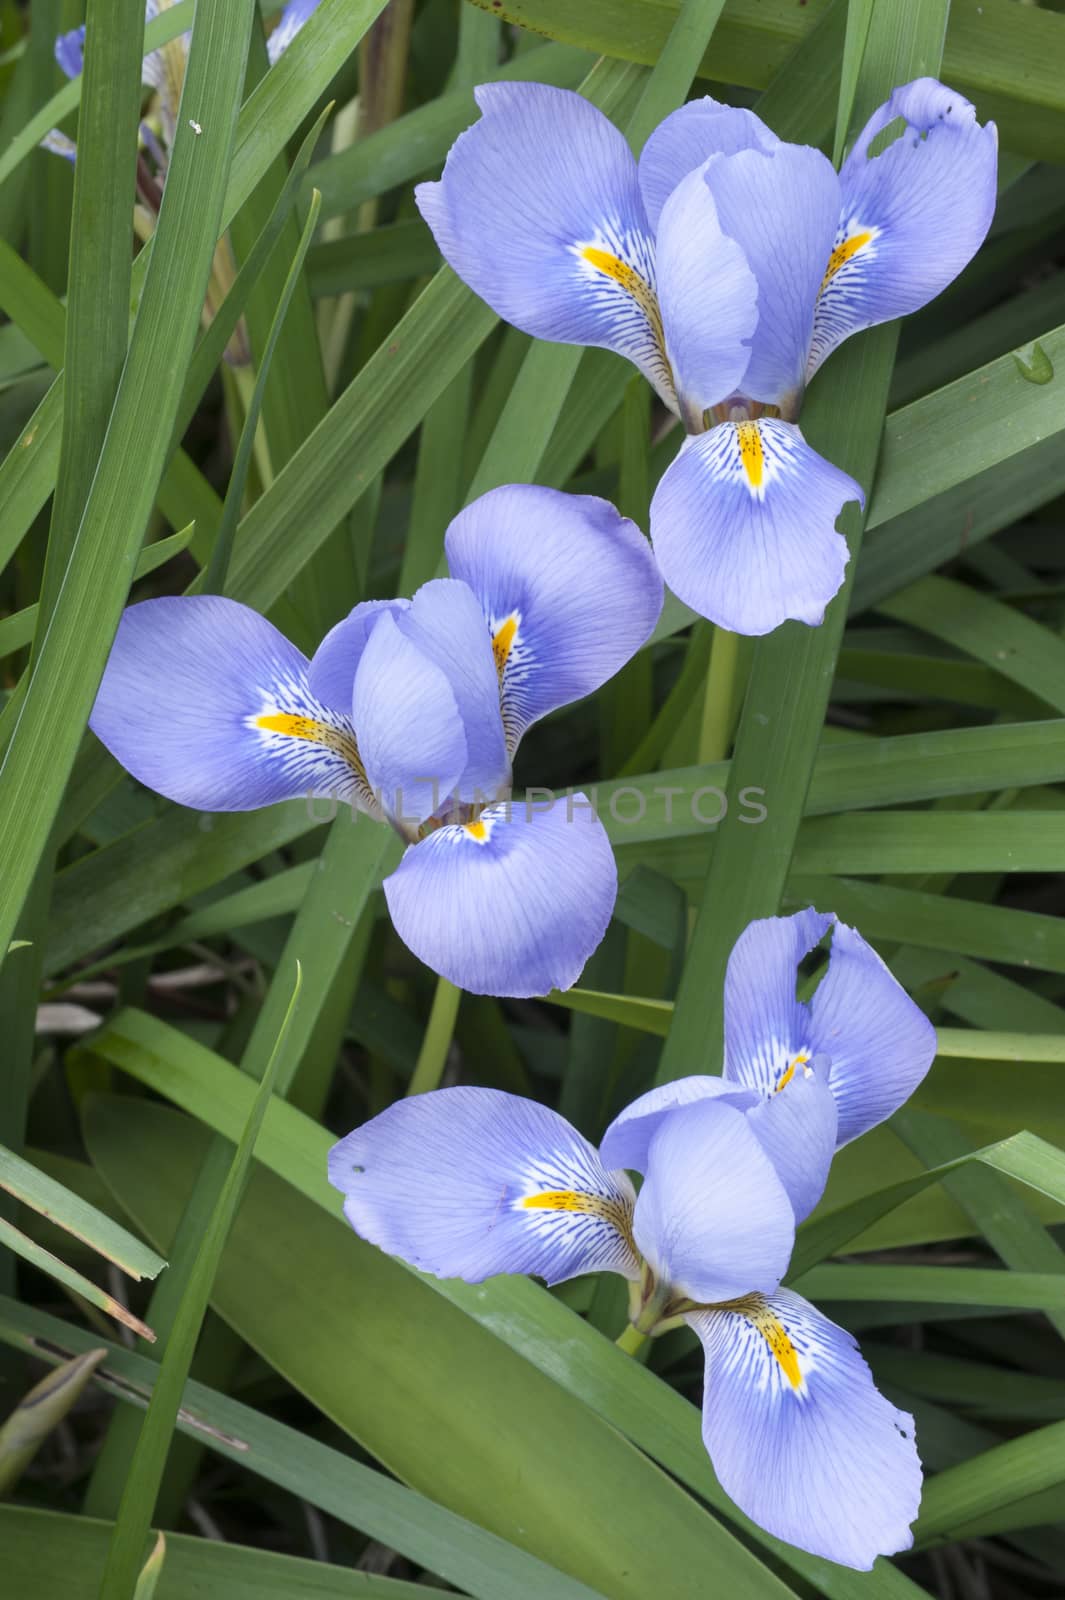 Blue and yellow iris flowers among green leaves